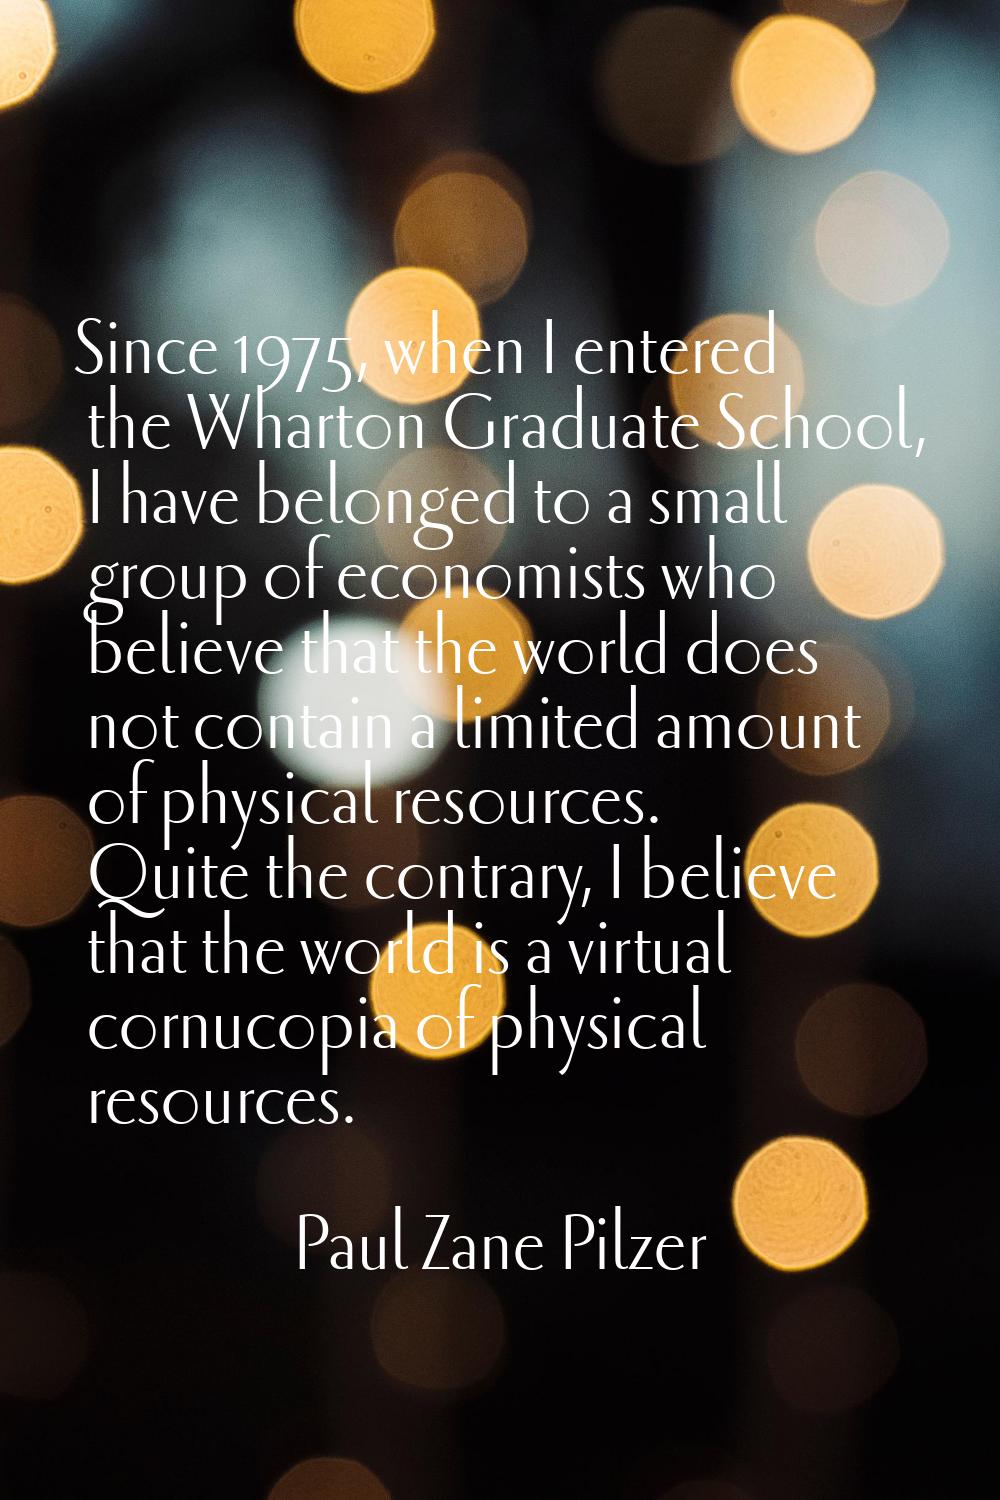 Since 1975, when I entered the Wharton Graduate School, I have belonged to a small group of economi